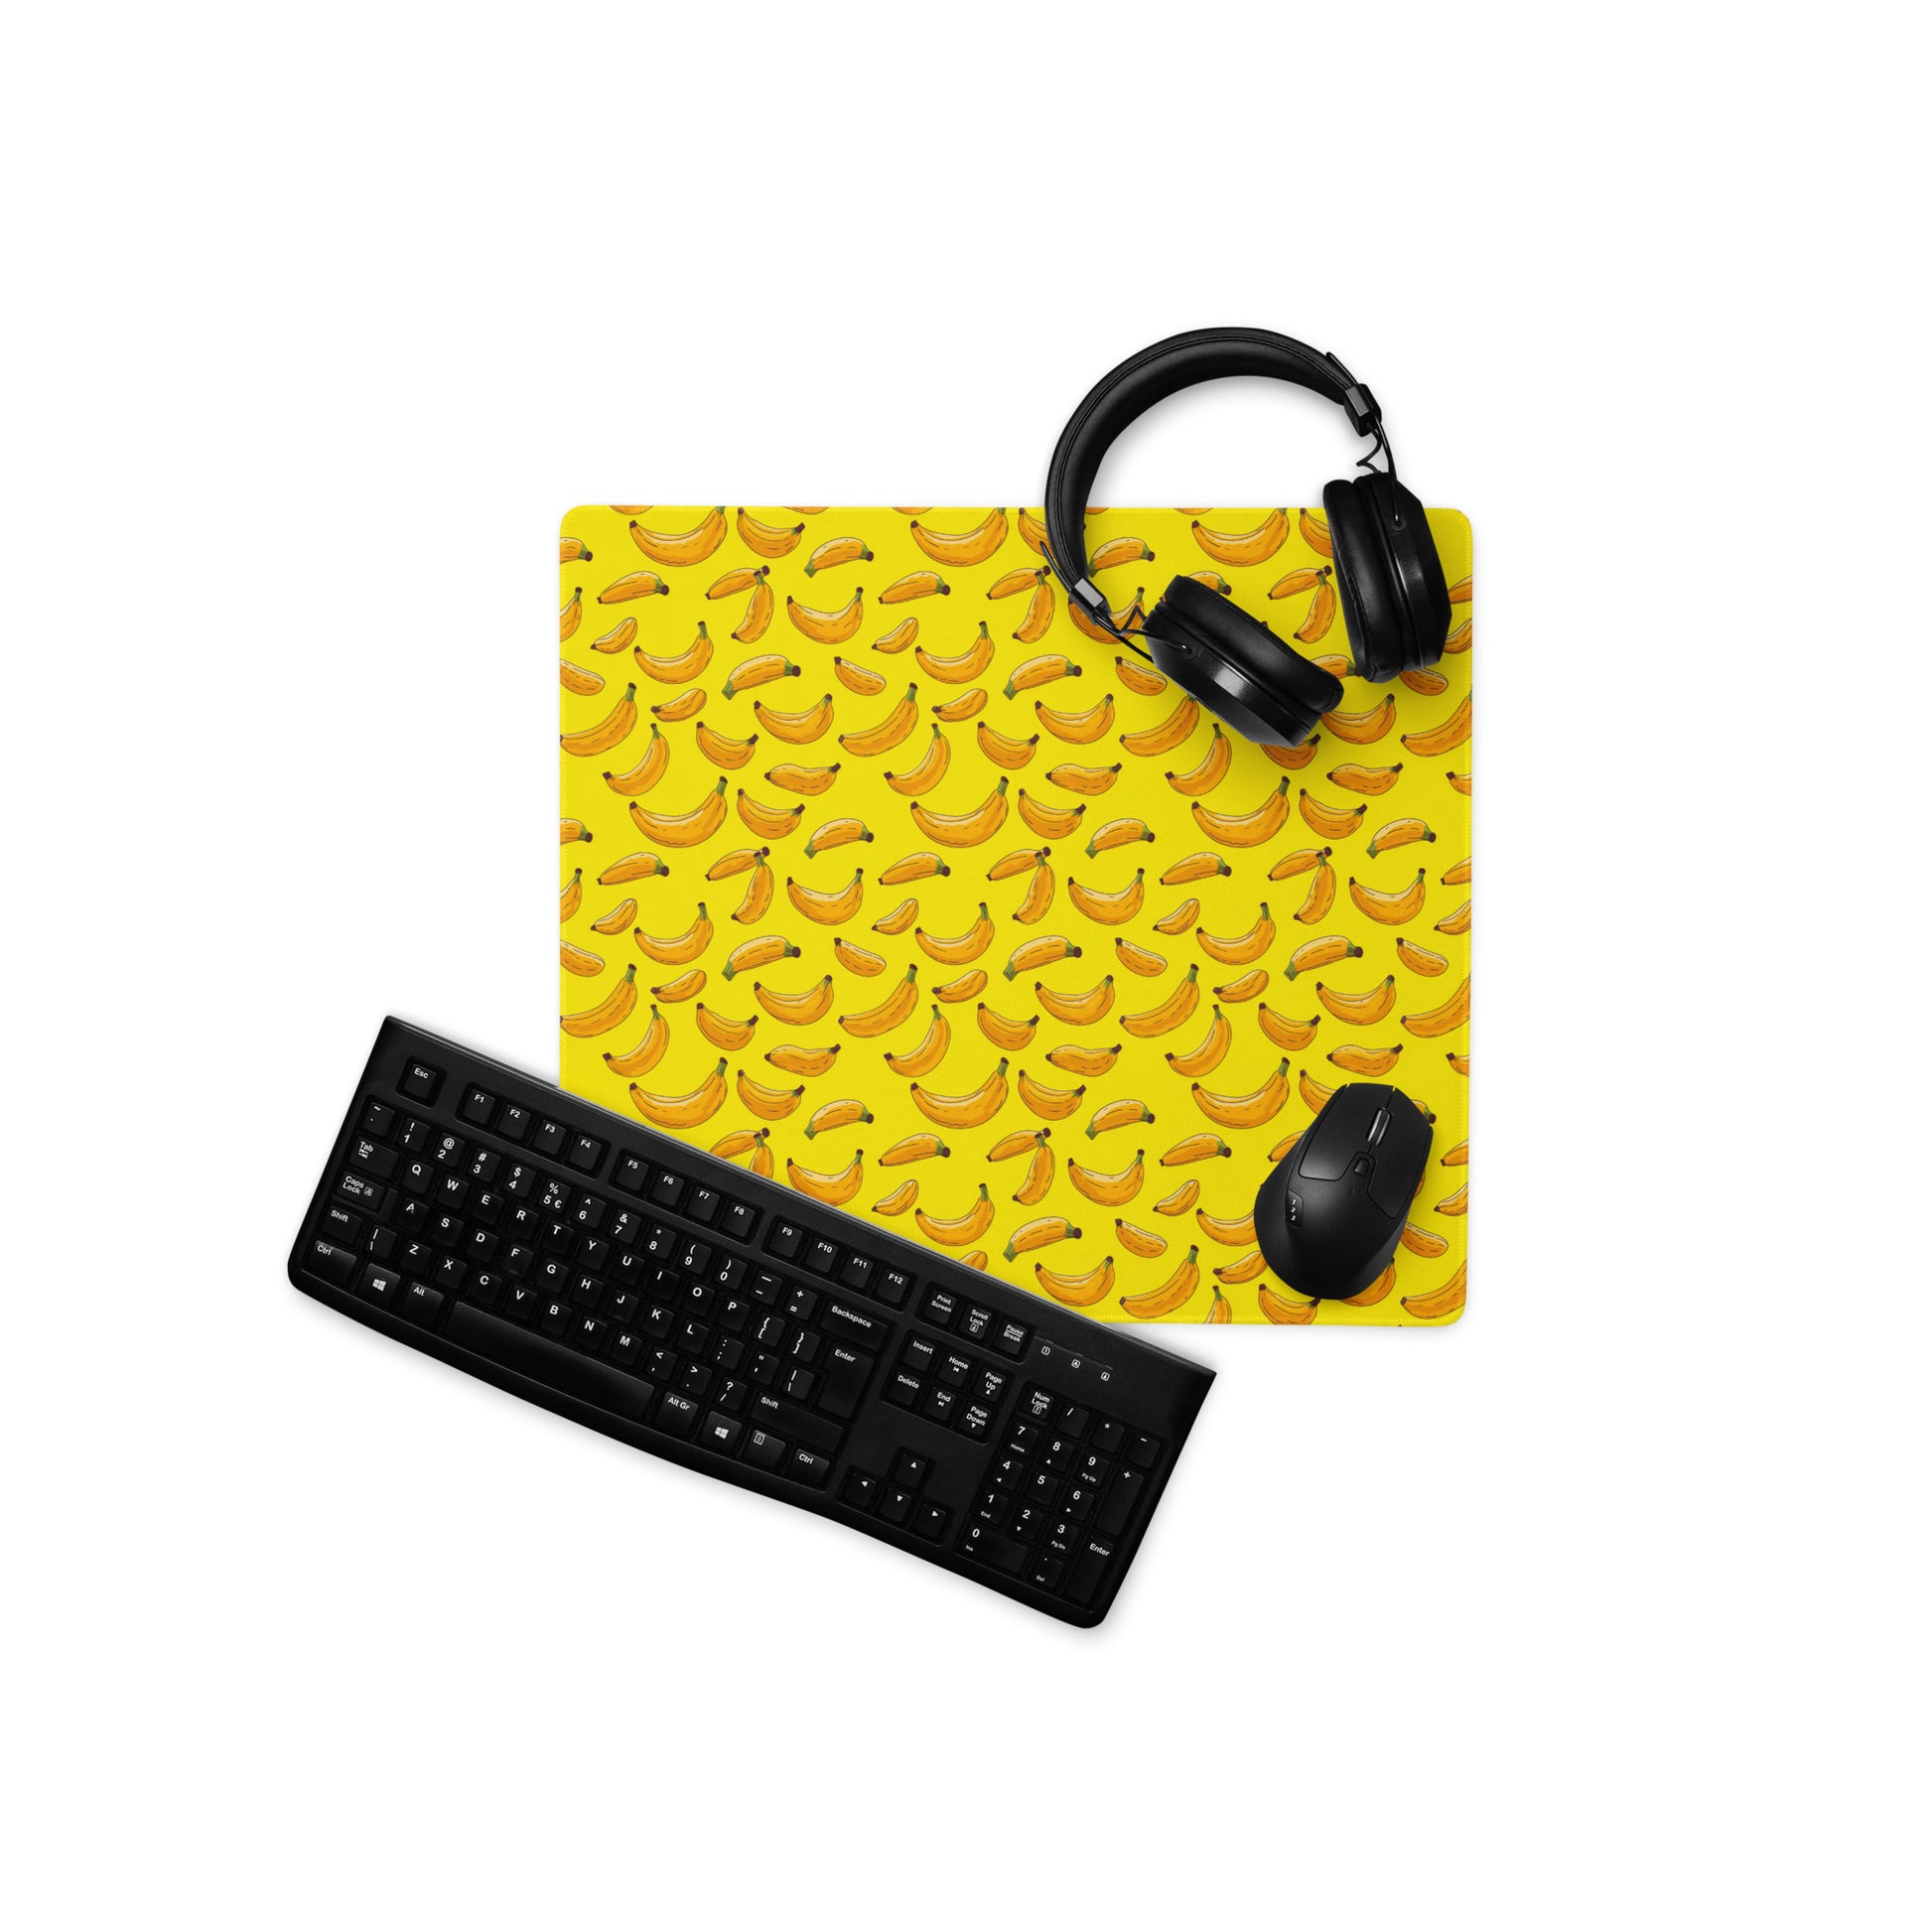 A 18" x 16" desk pad with bananas all over it displayed with a keyboard, headphones and a mouse on it. Yellow in color.